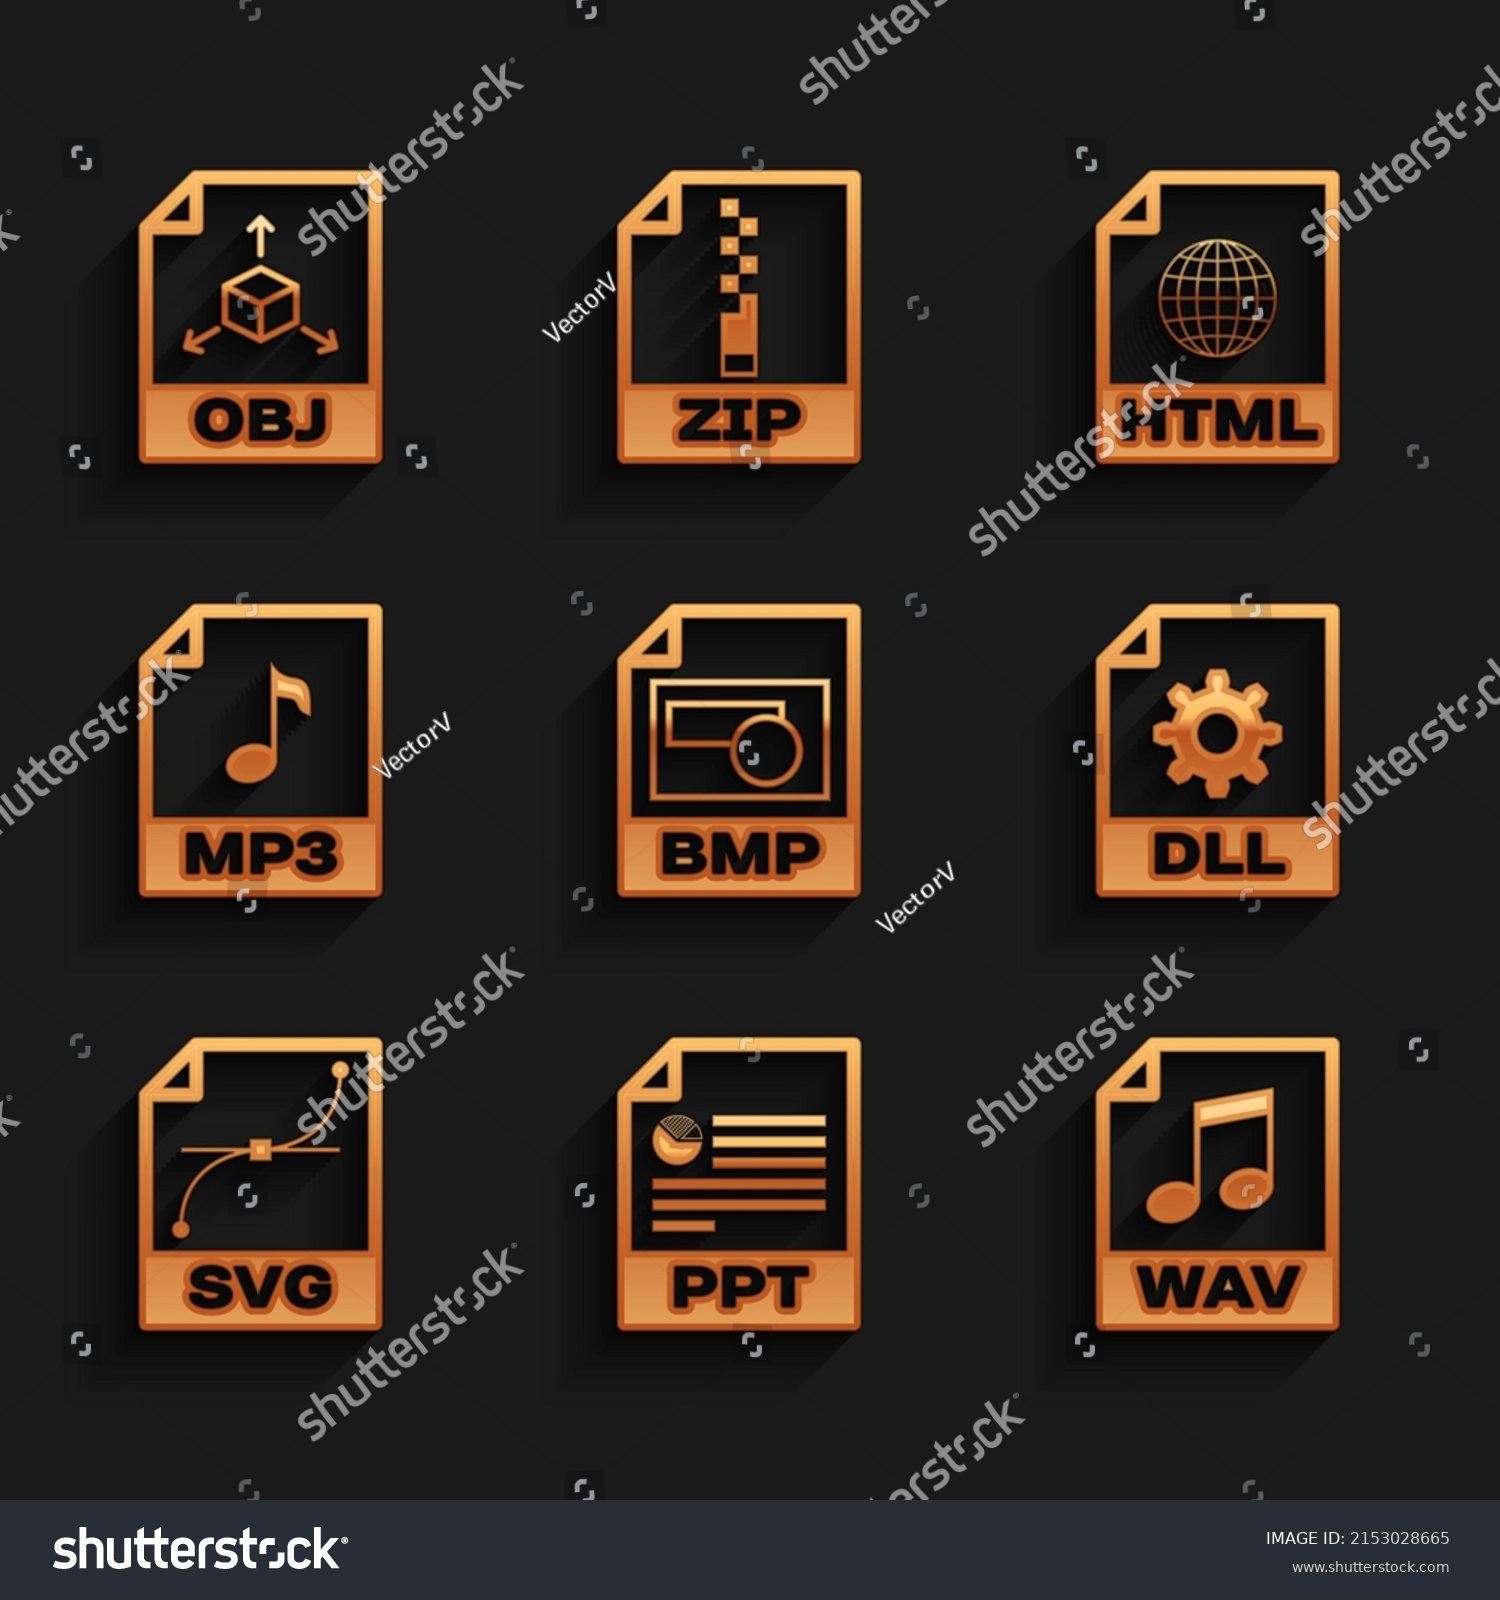 SVG of Set BMP file document, PPT, WAV, DLL, SVG and MP3 icon. Vector svg